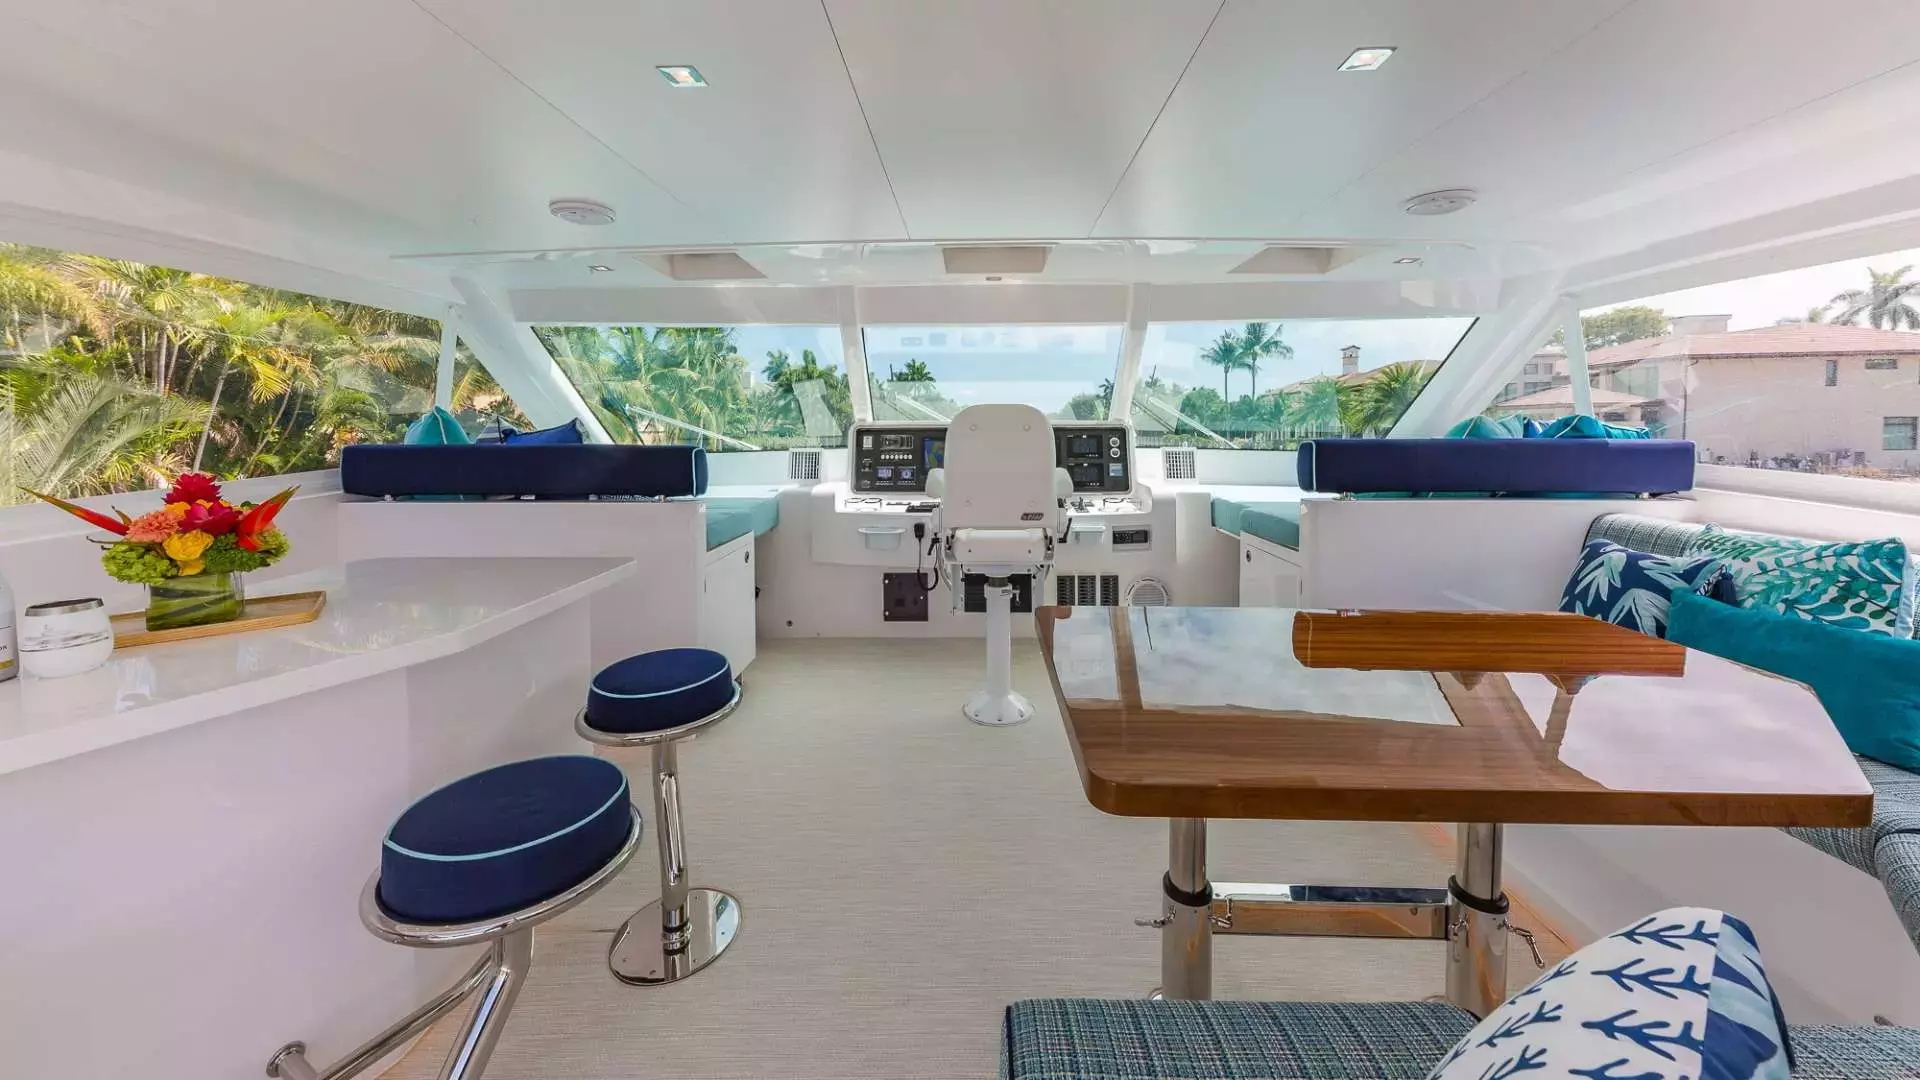 Mucho Gusto by Horizon - Top rates for a Charter of a private Power Catamaran in British Virgin Islands